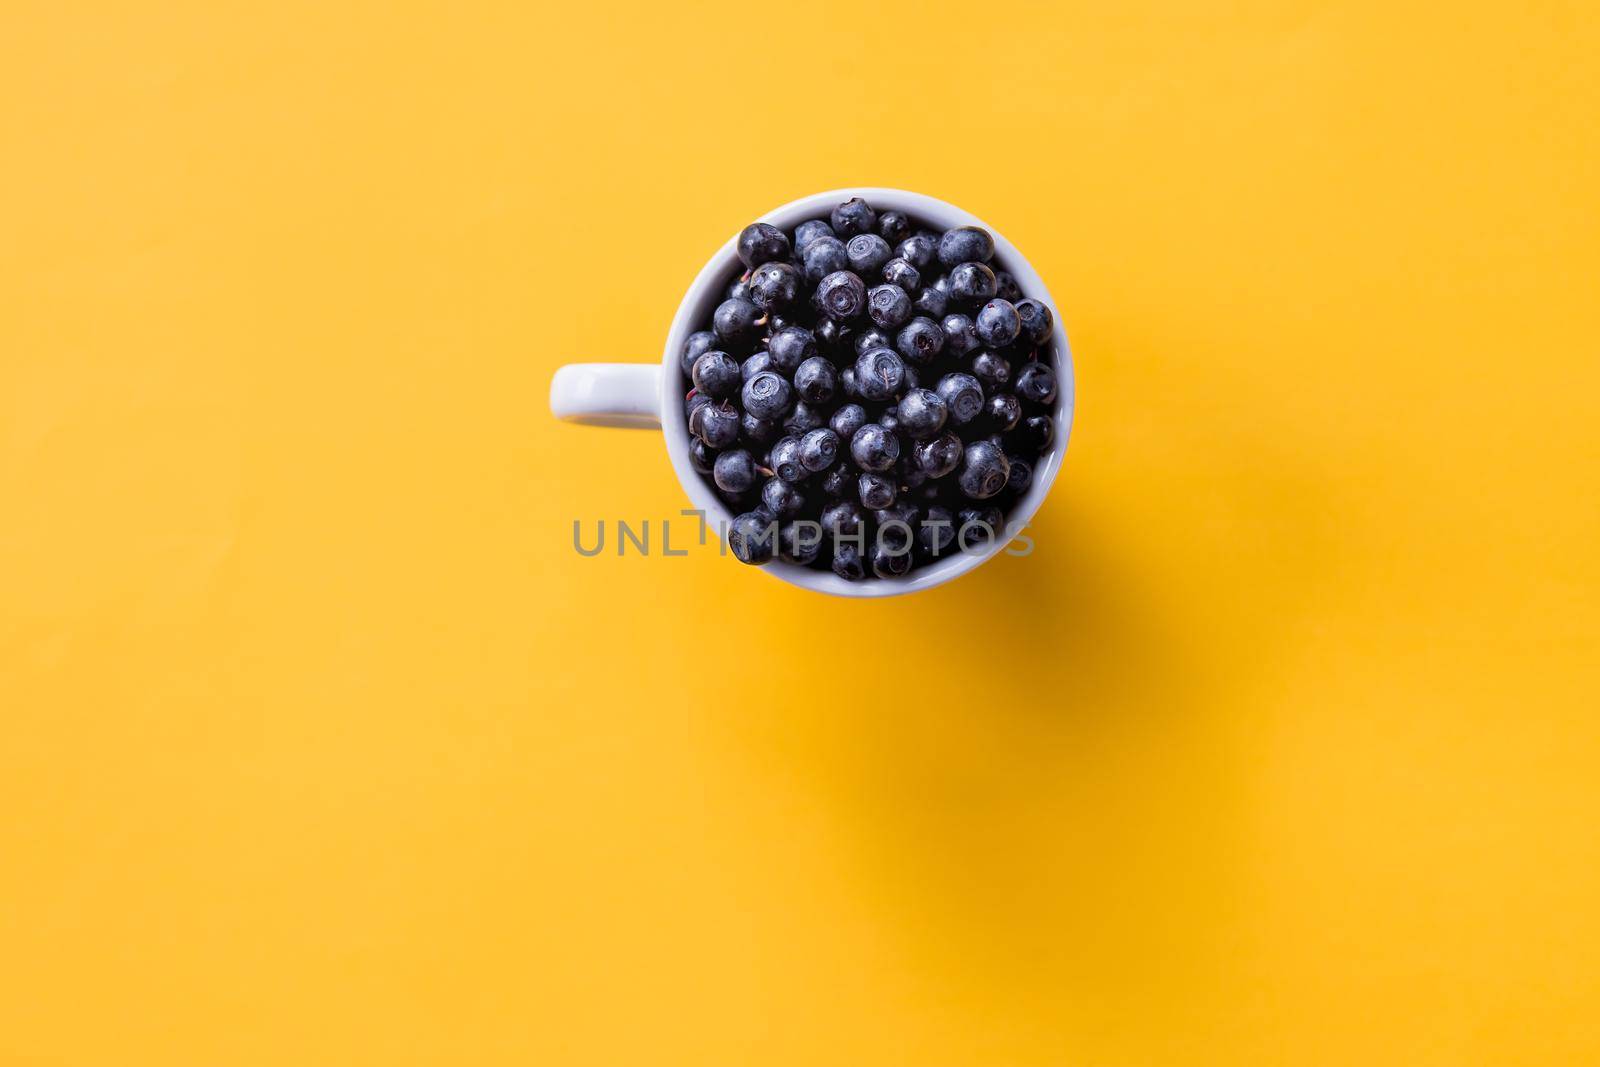 Art Nouveau style concept image, White cup full of blueberries on a colored geometric trendy background, food and healthy concept